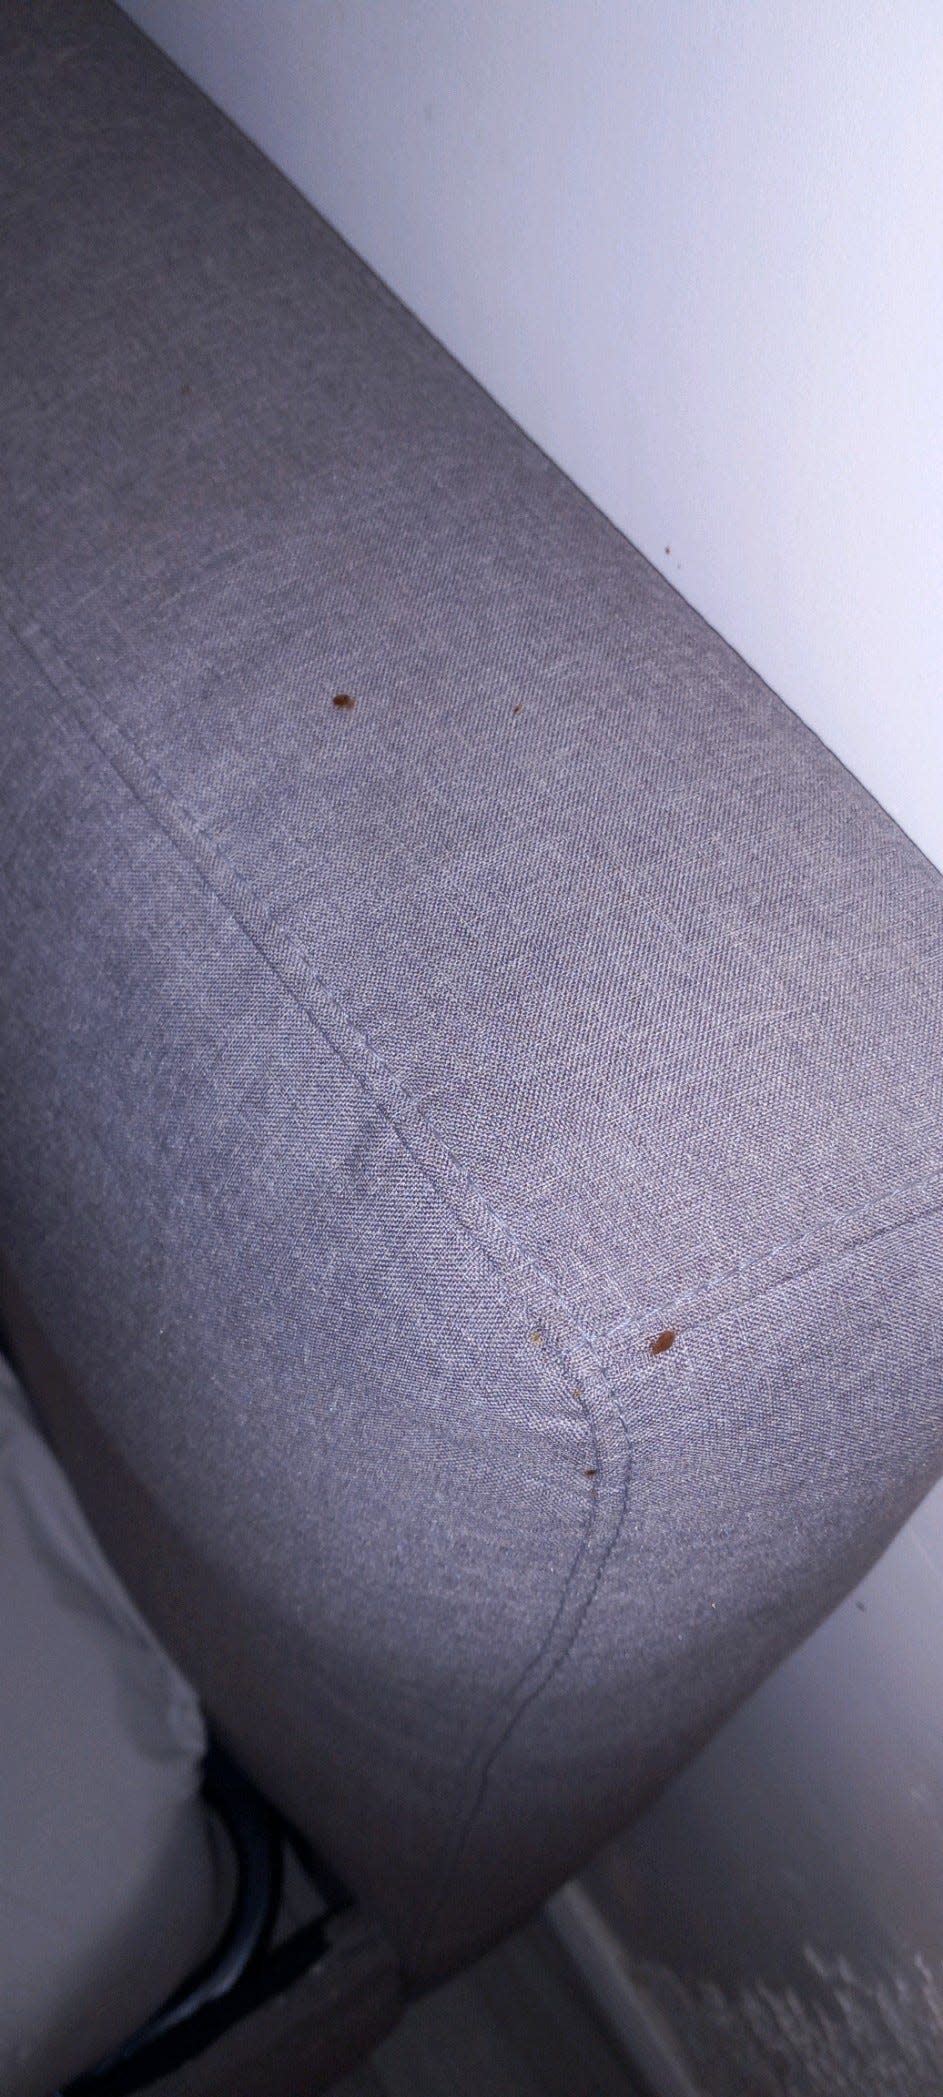 A picture of the headboard at the Airbnb that Andrew Forcier rented in Montreal in May 2023. Two bed bugs are visible.